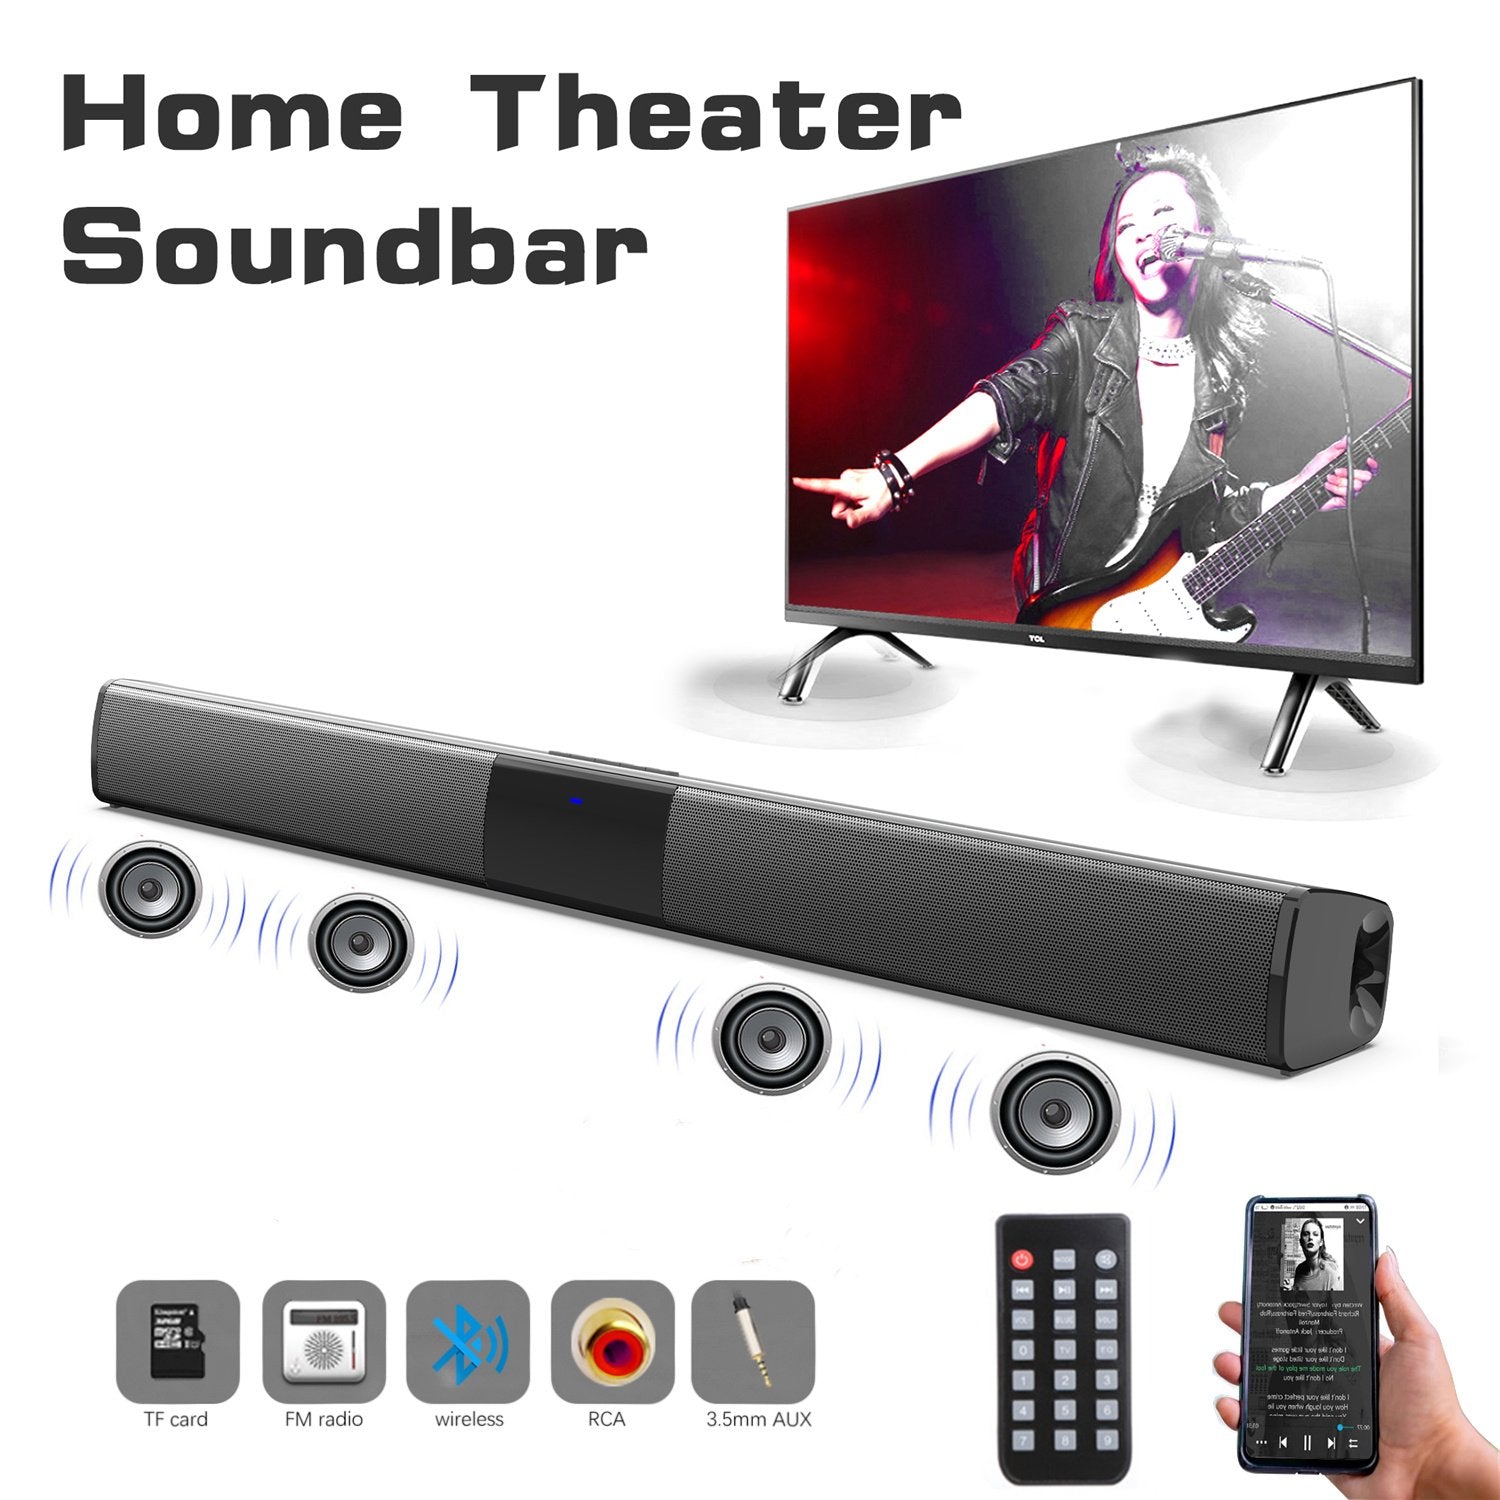 22 Inch Sound Bar with 4 Built-in Subwoofers, 20W Bluetooth Speaker with Remote, TF Play, FM Radio, Rechargeable, Wireless Soundbar for TV Smartphone PC, Black